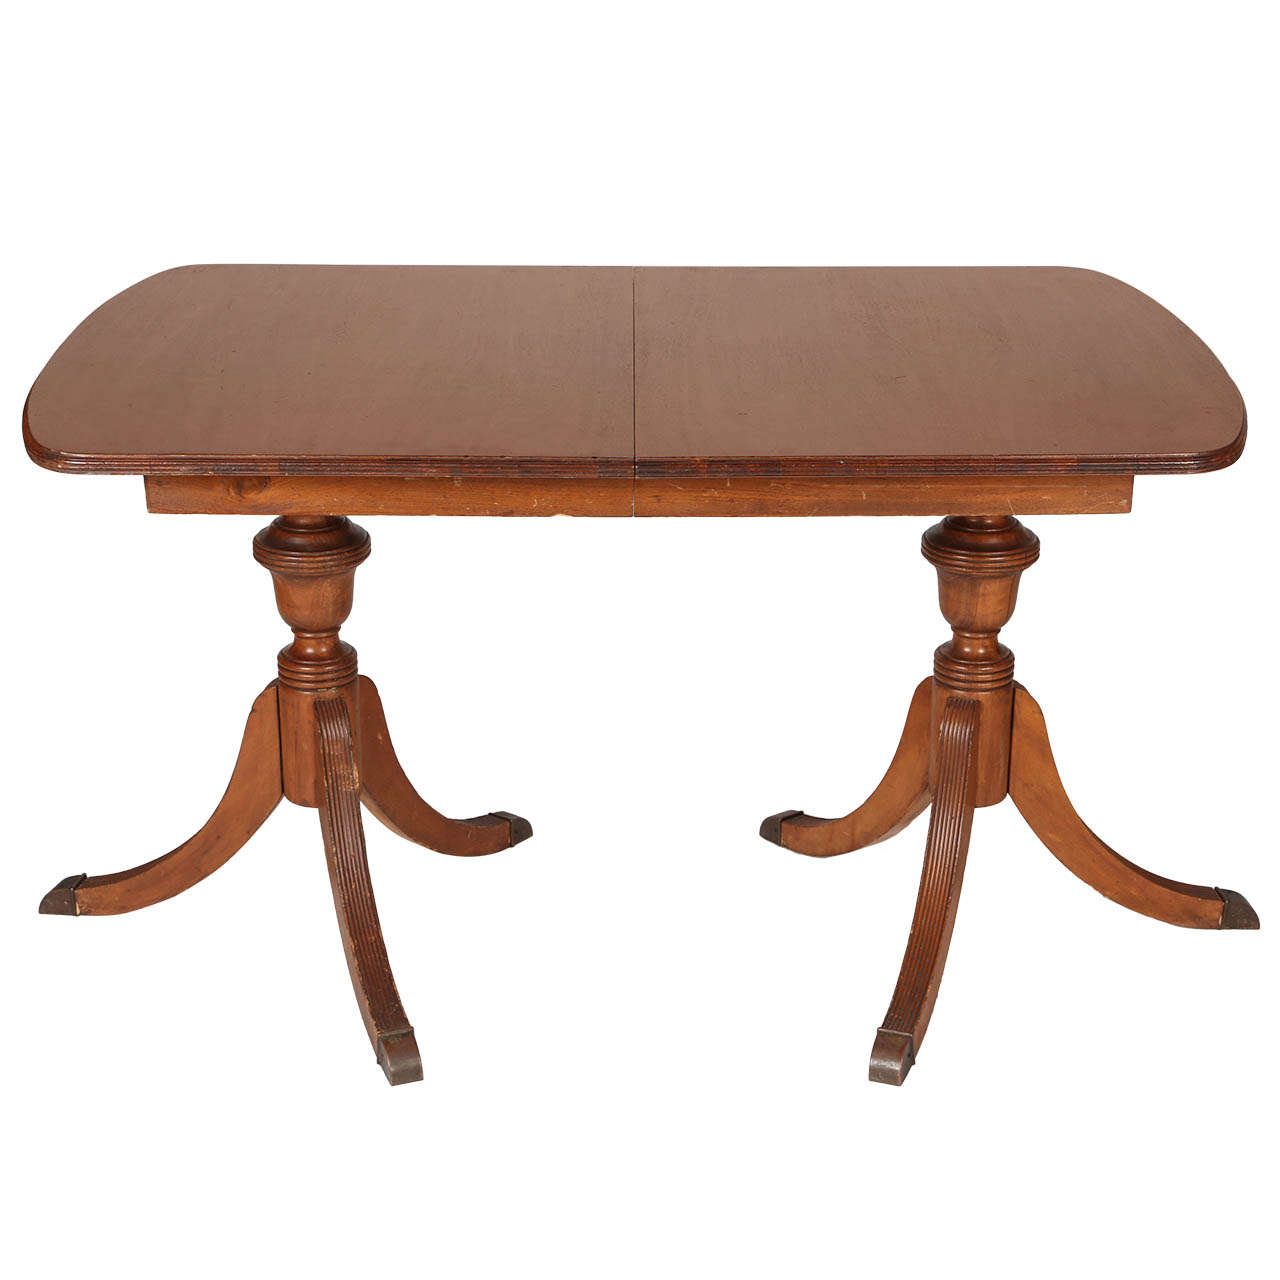 Duncan Phyfe Style Mahogany Dining Table For Sale At 1stdibs